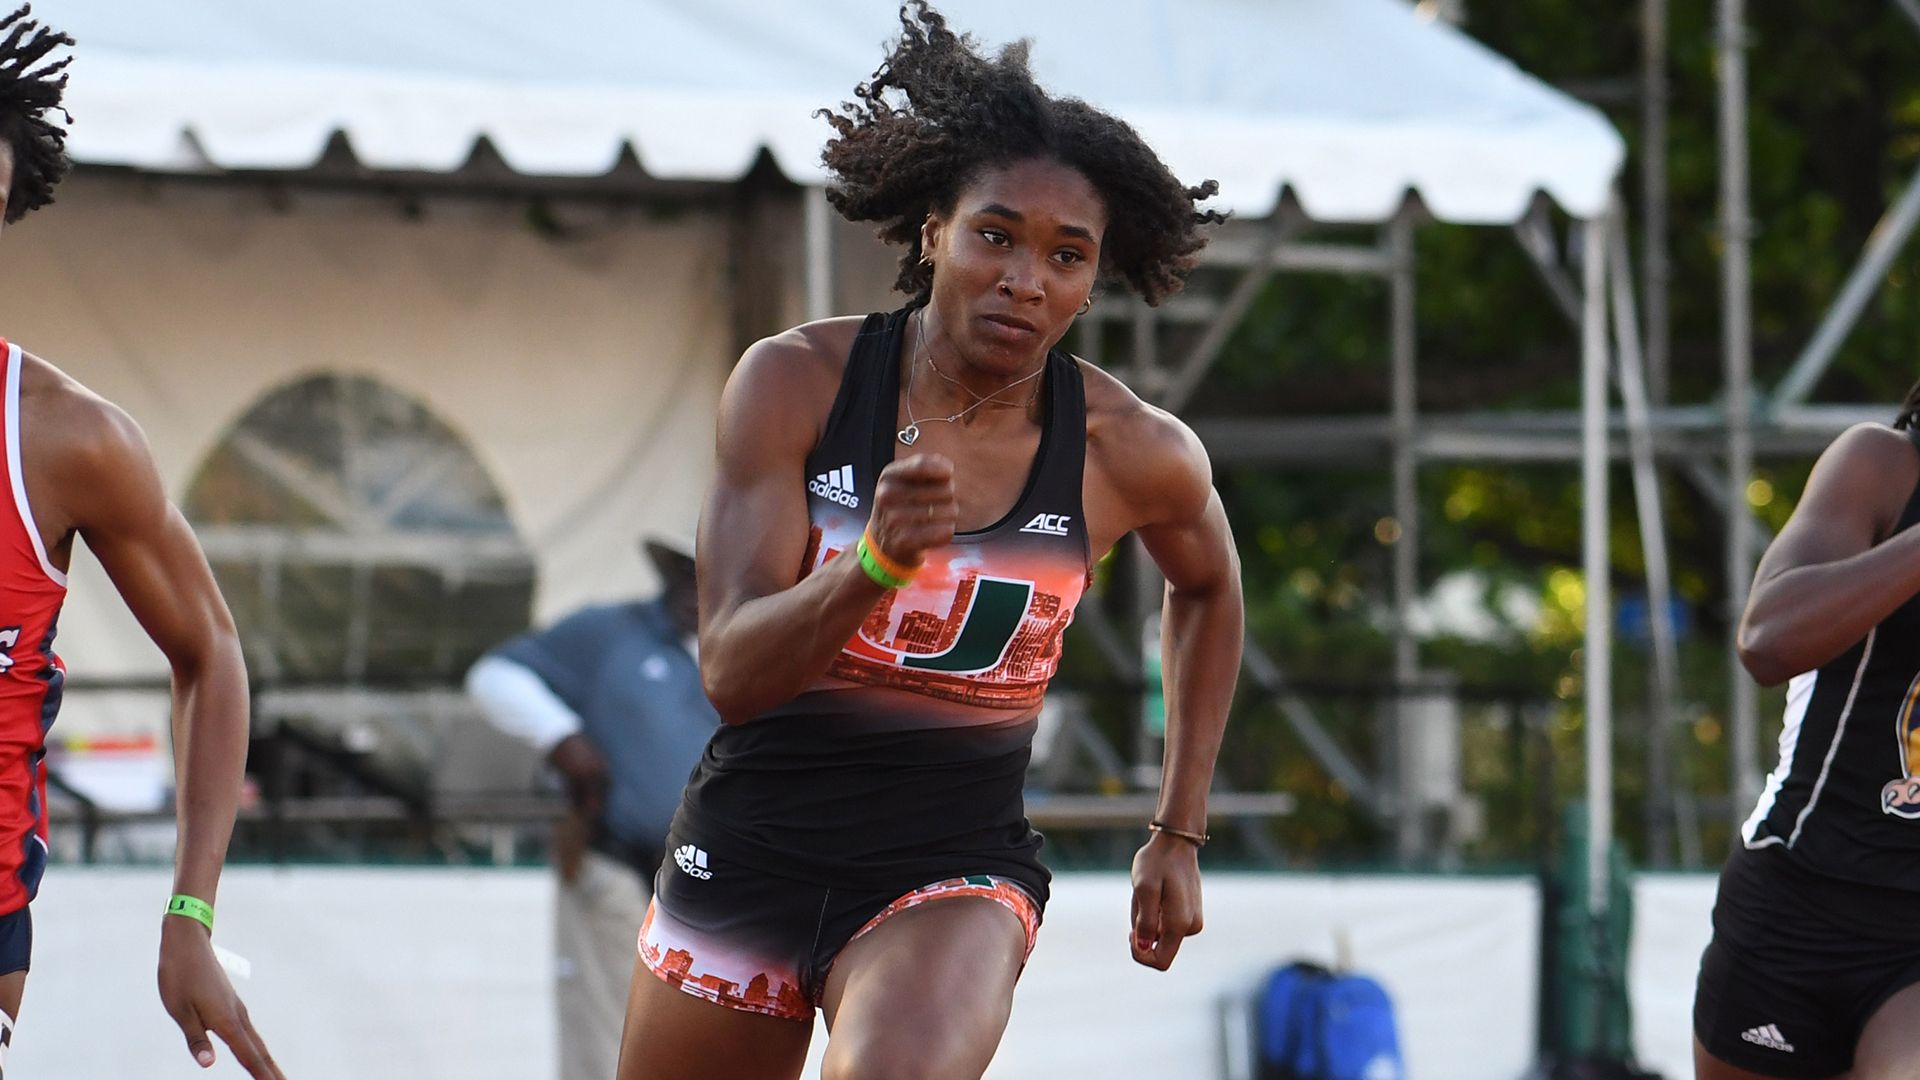 Canes Set to Host ACC Track Championships